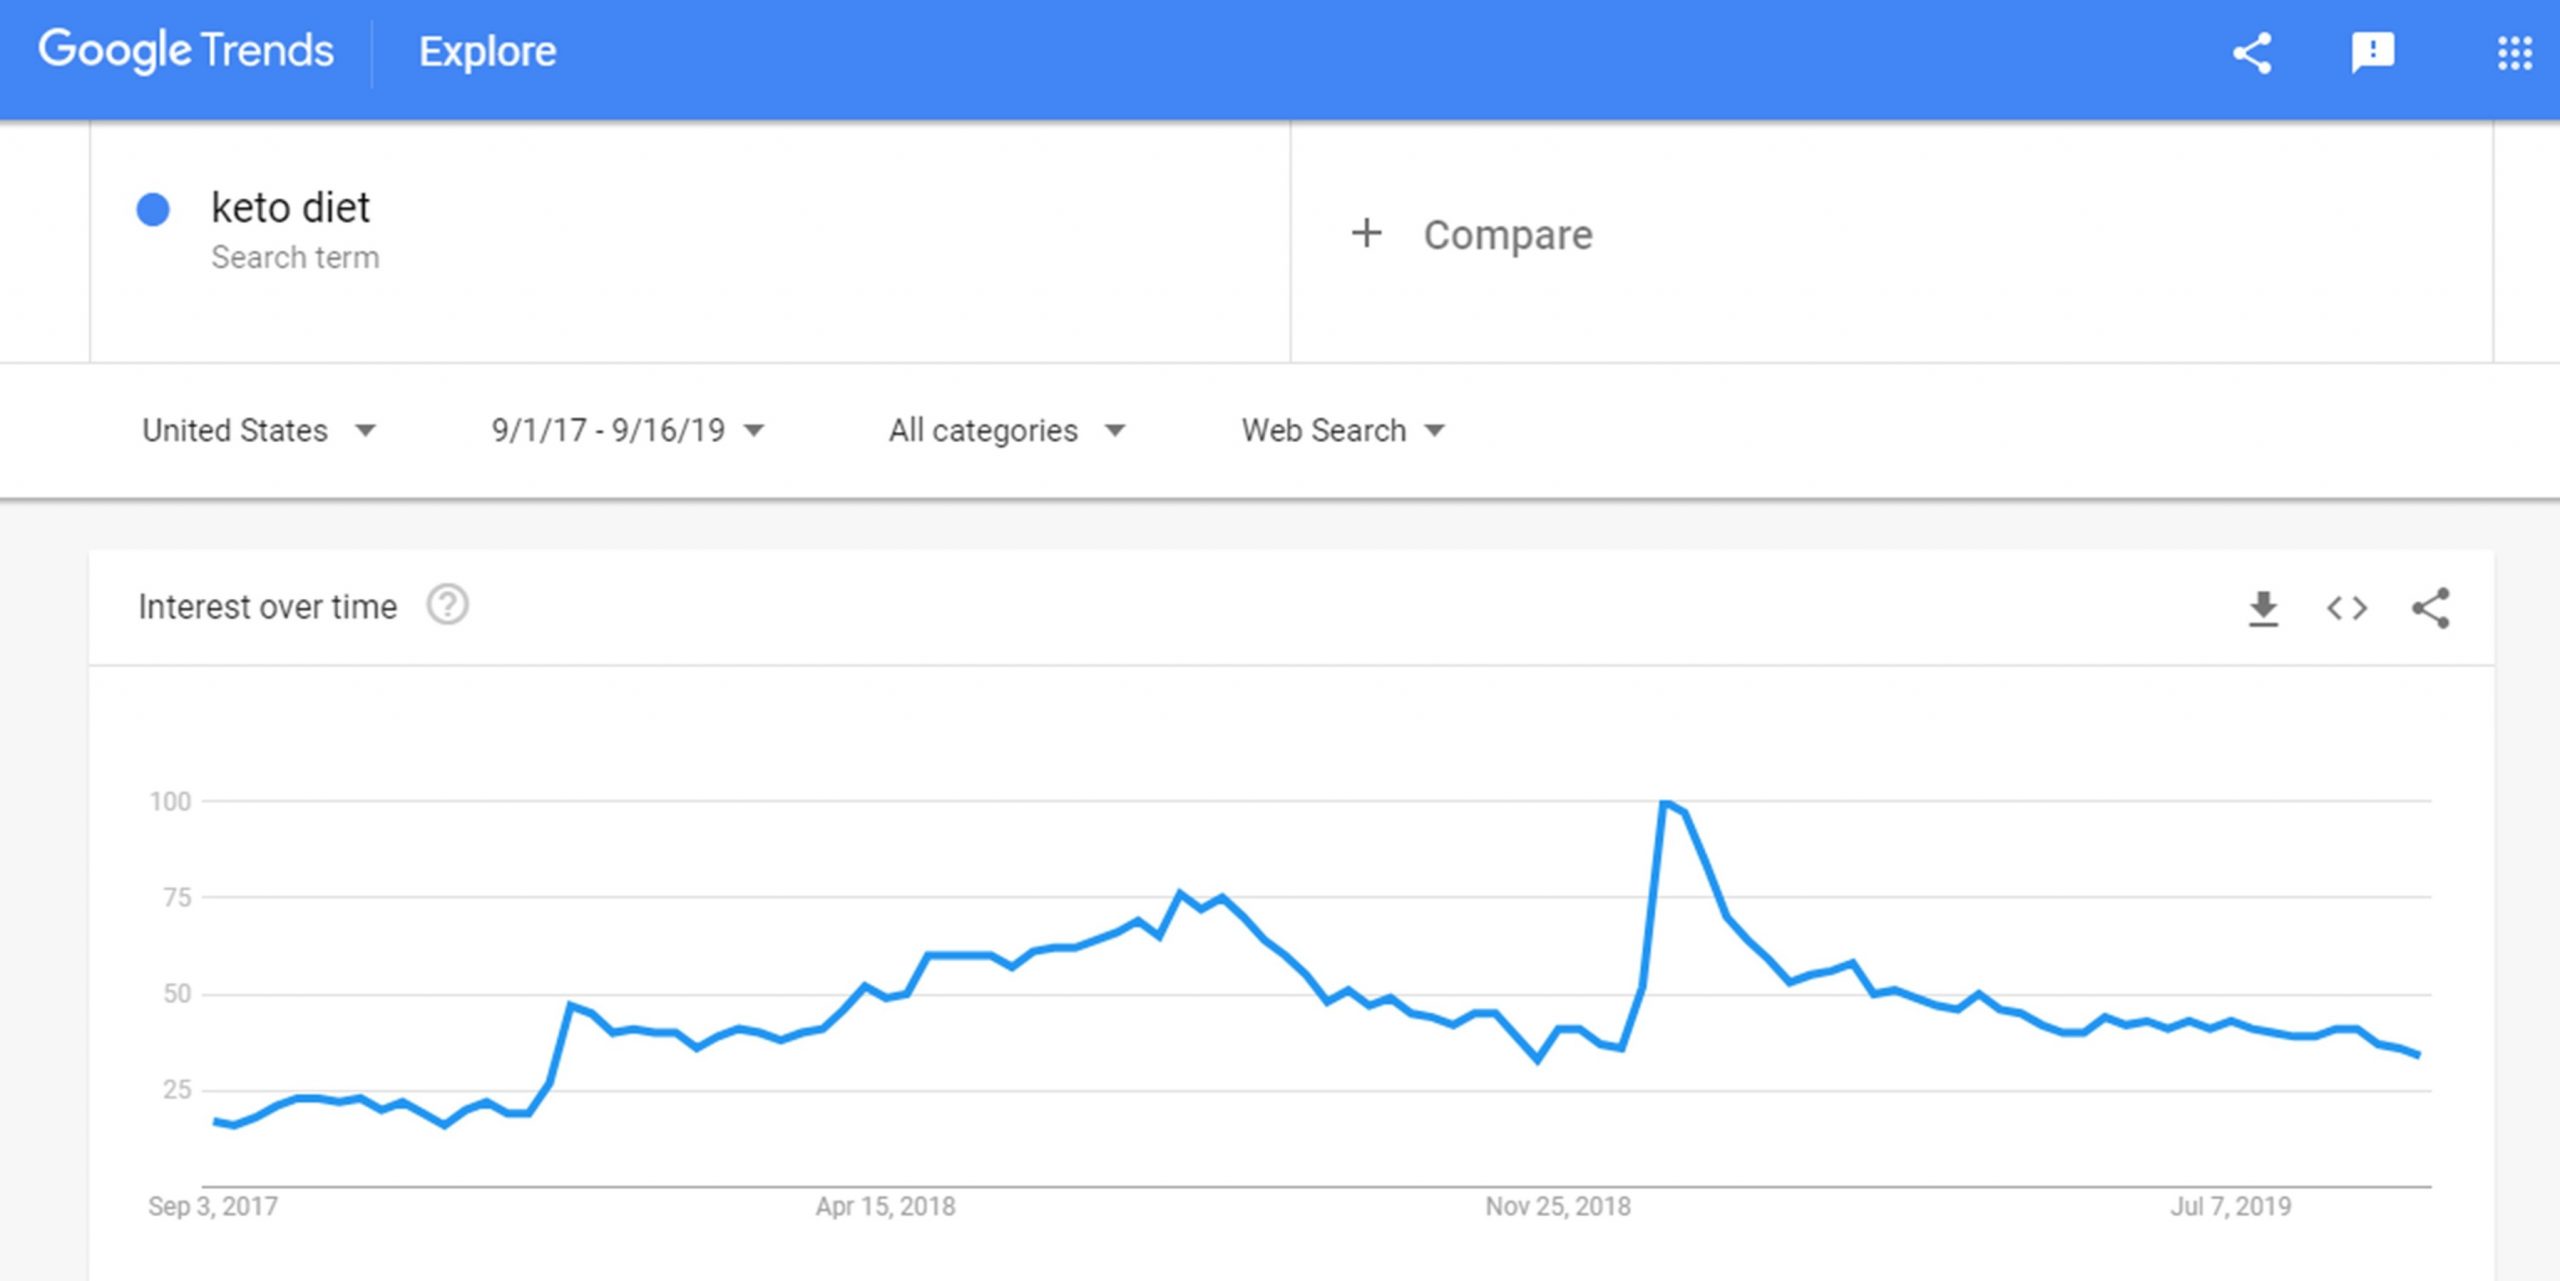 Google trends chart showing interest about keto diet keyword over time